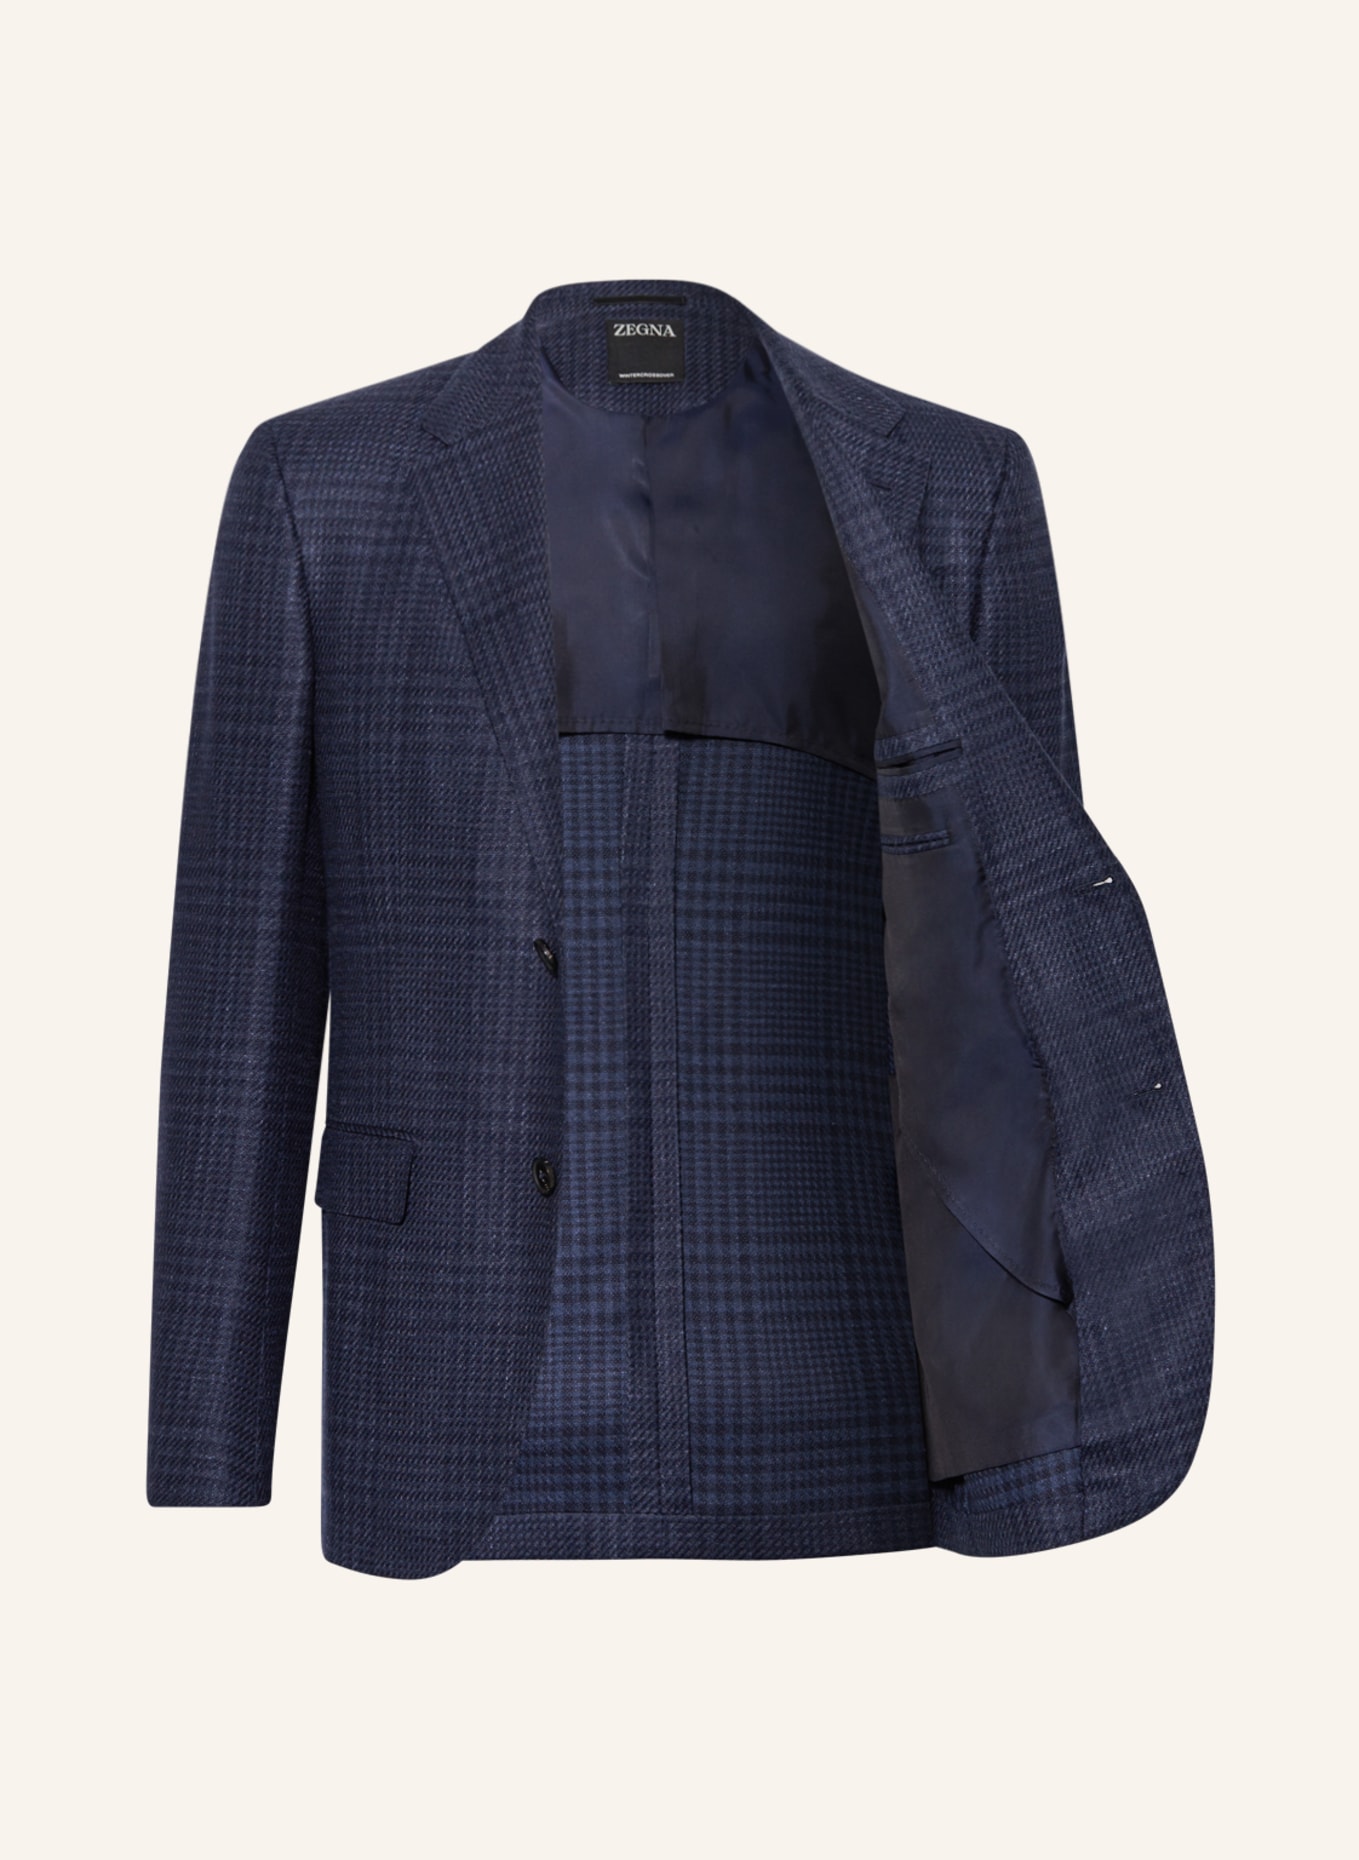 ZEGNA Tailored jacket extra slim fit, Color: NAVY (Image 4)